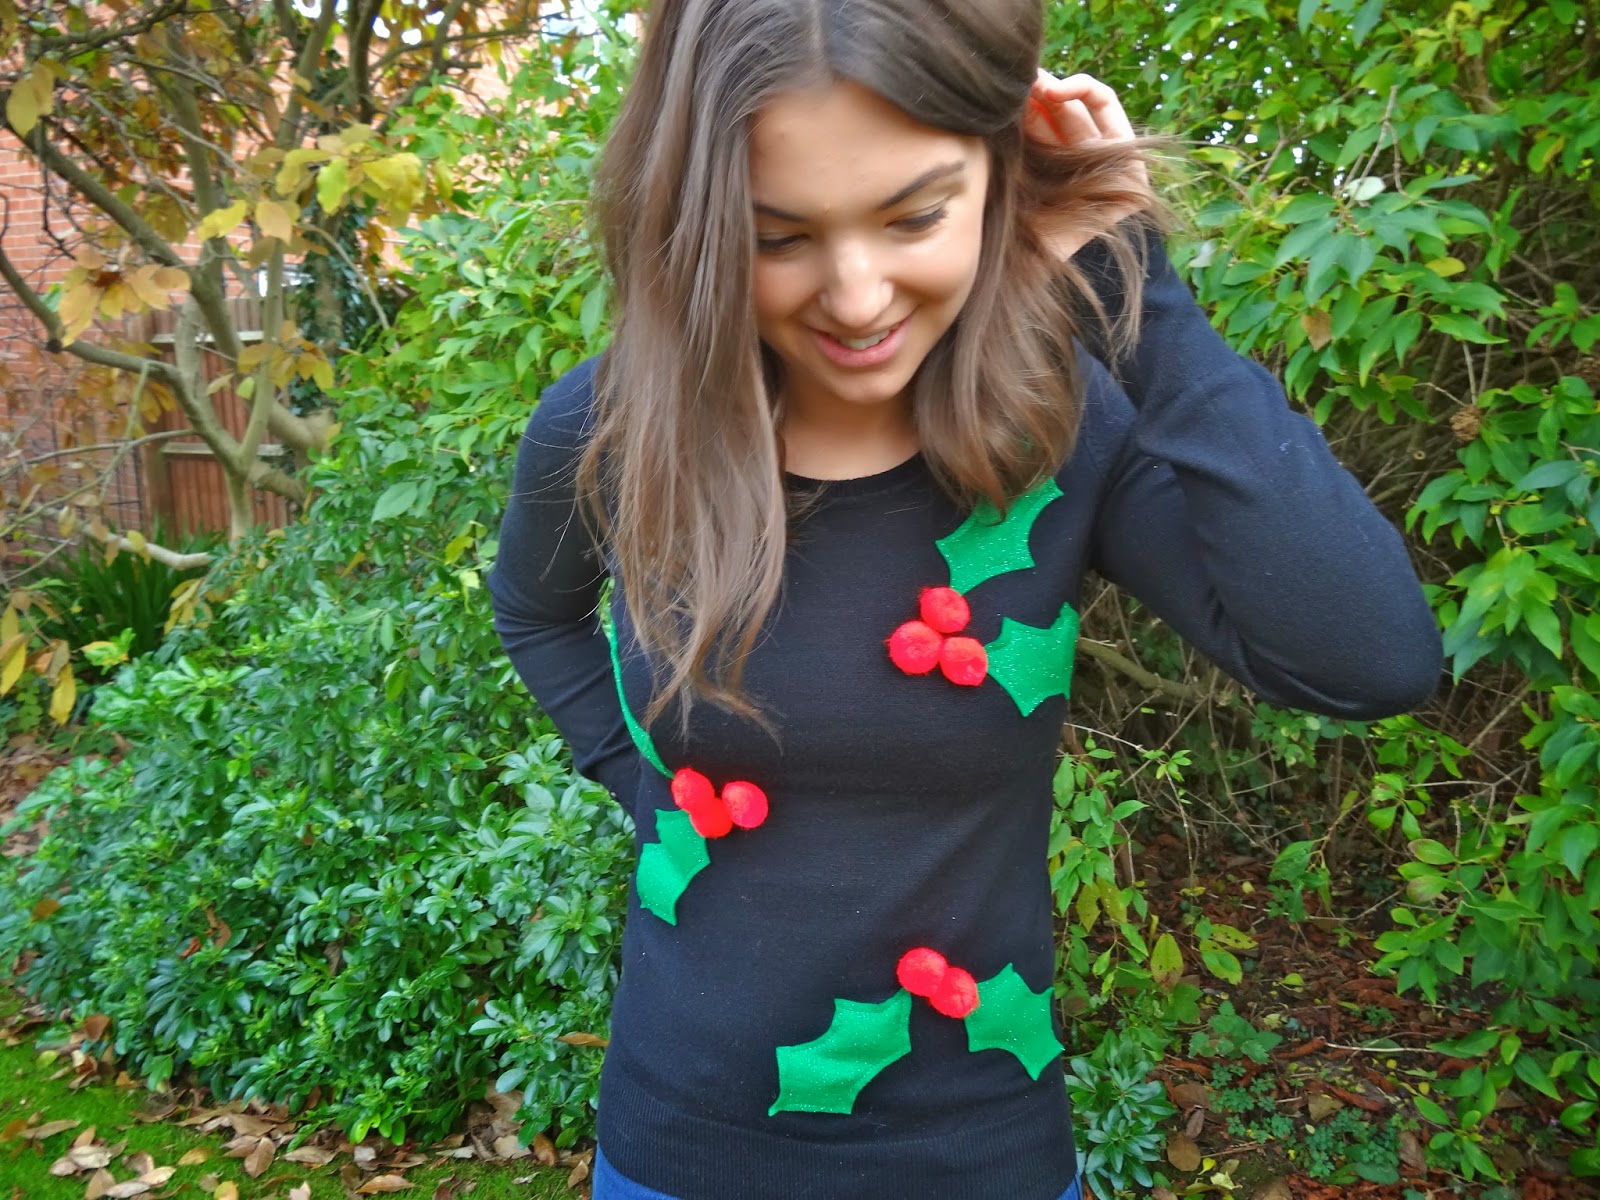 Trends With Benefits DIY Christmas Jumper